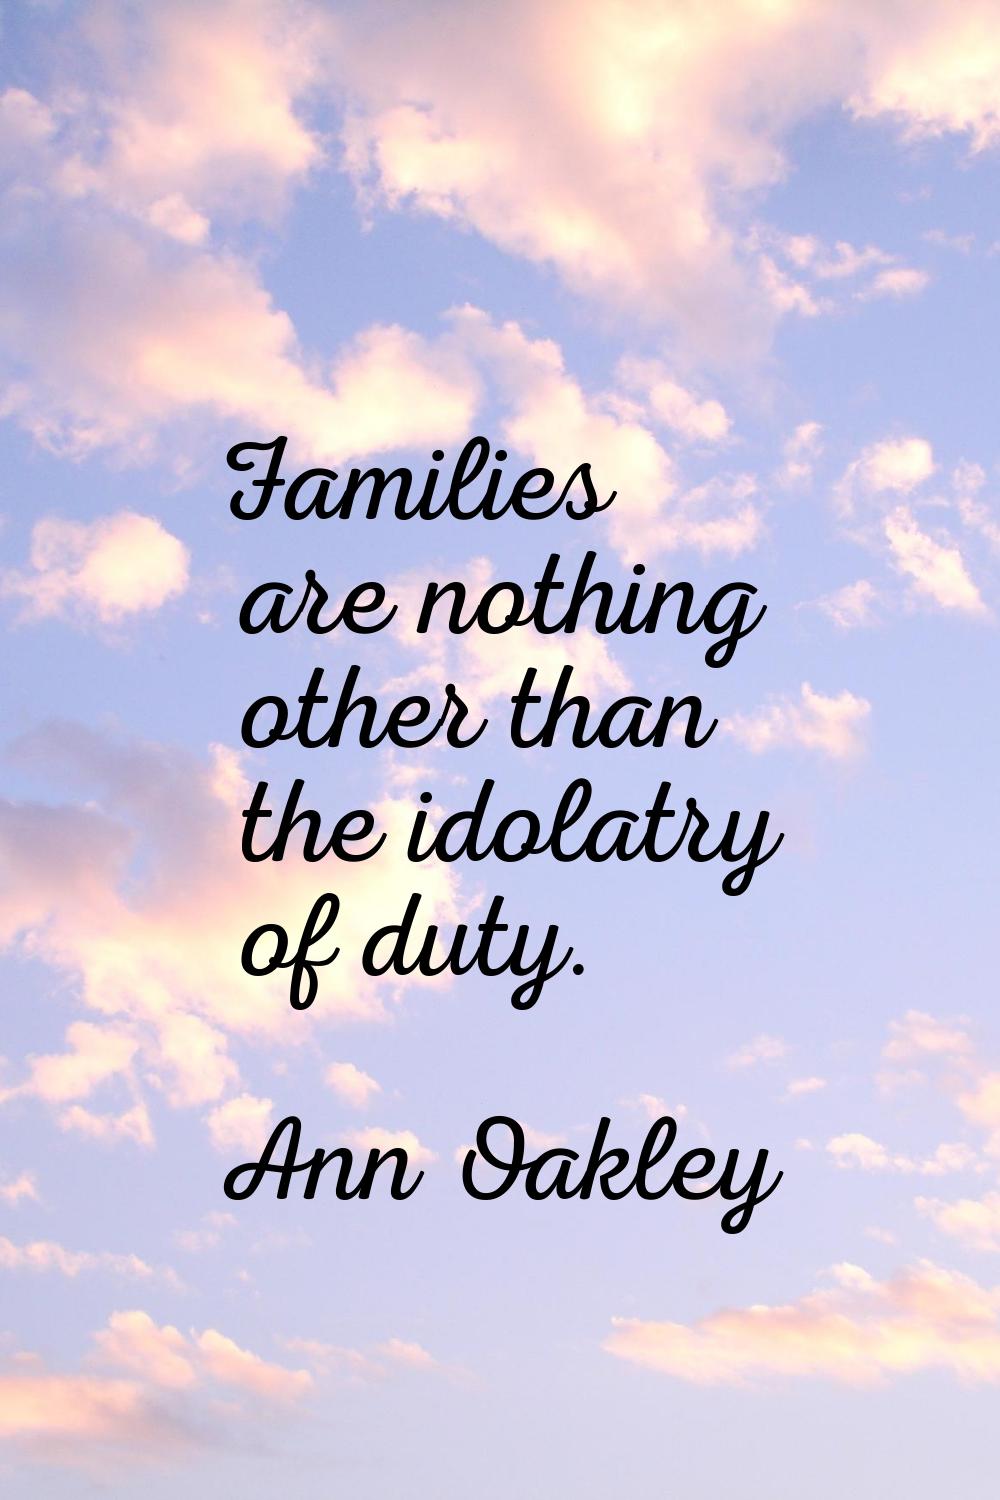 Families are nothing other than the idolatry of duty.